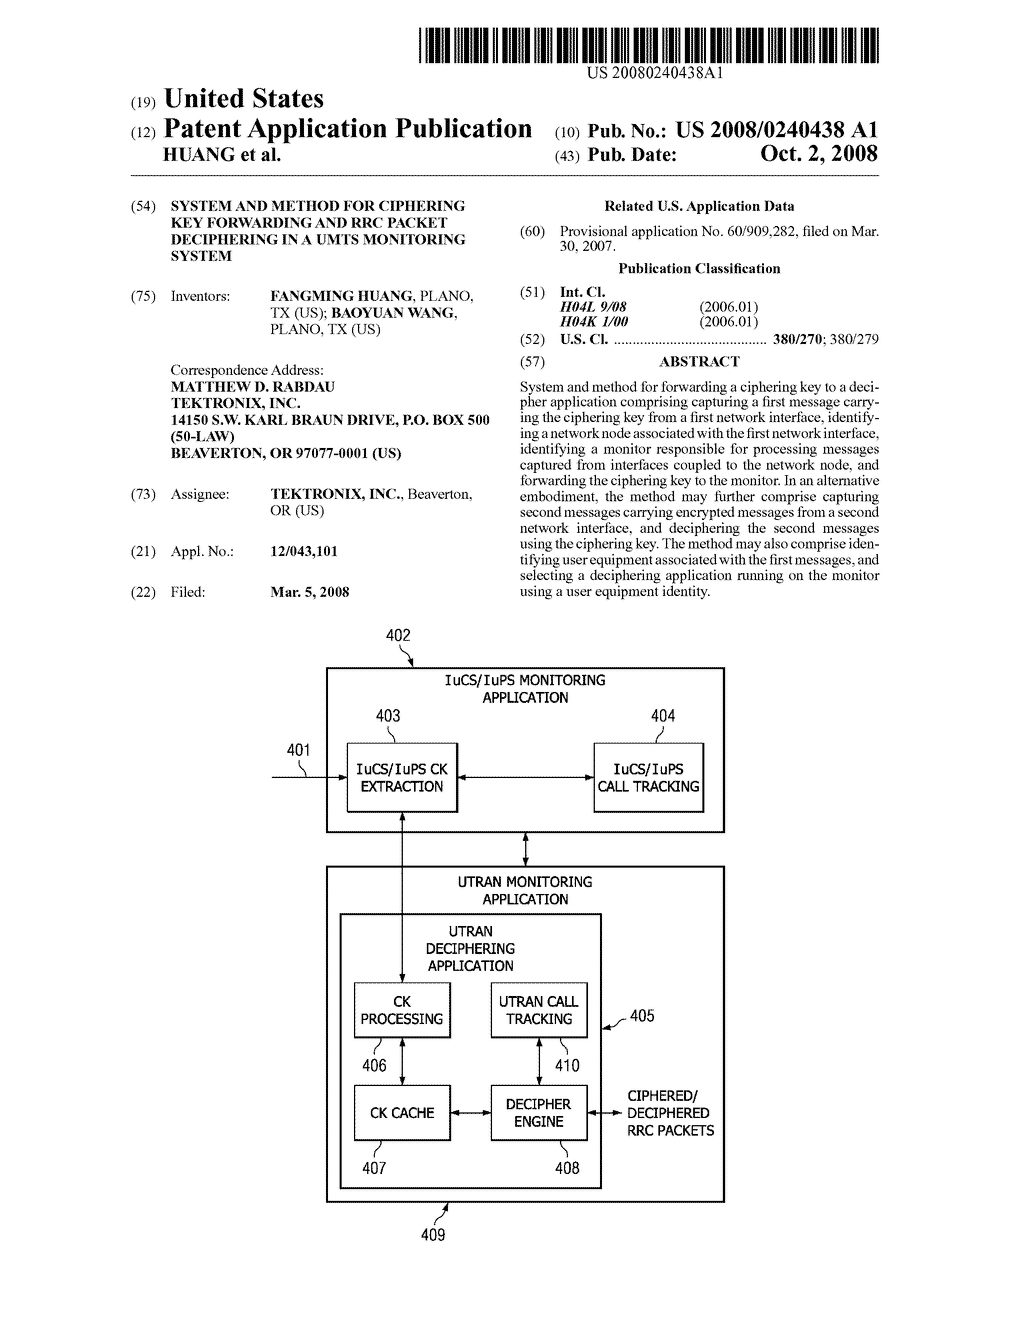 SYSTEM AND METHOD FOR CIPHERING KEY FORWARDING AND RRC PACKET DECIPHERING IN A UMTS MONITORING SYSTEM - diagram, schematic, and image 01